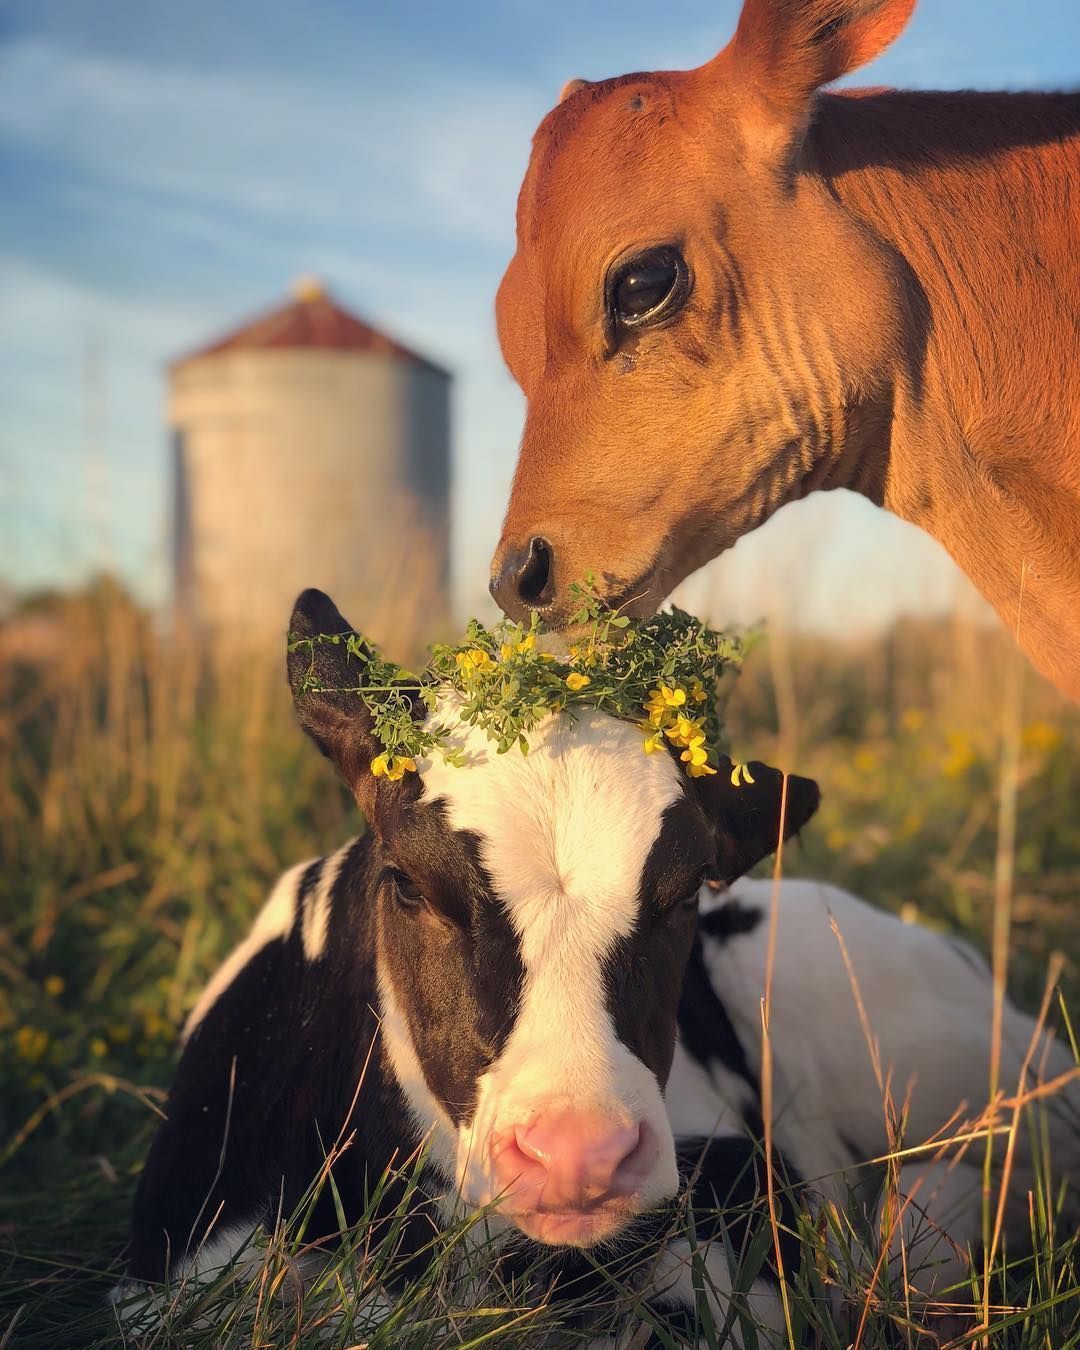 A baby cow wearing a flower crown is nuzzled by an adult cow. - Farm